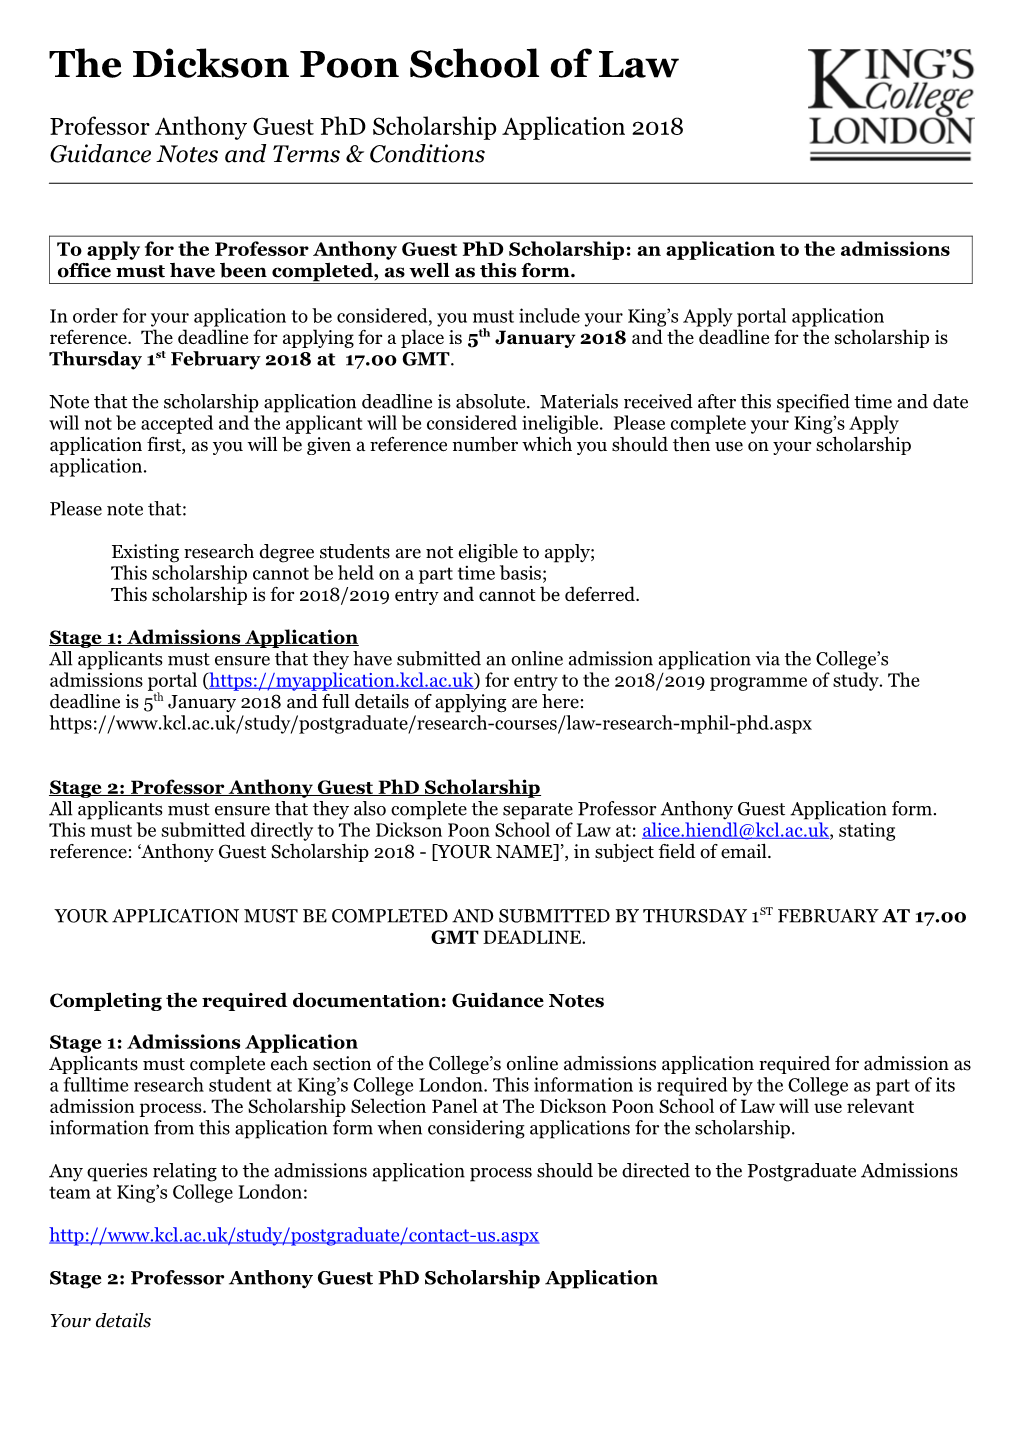 To Applyfor the Professor Anthony Guest Phd Scholarship: an Application to the Admissions